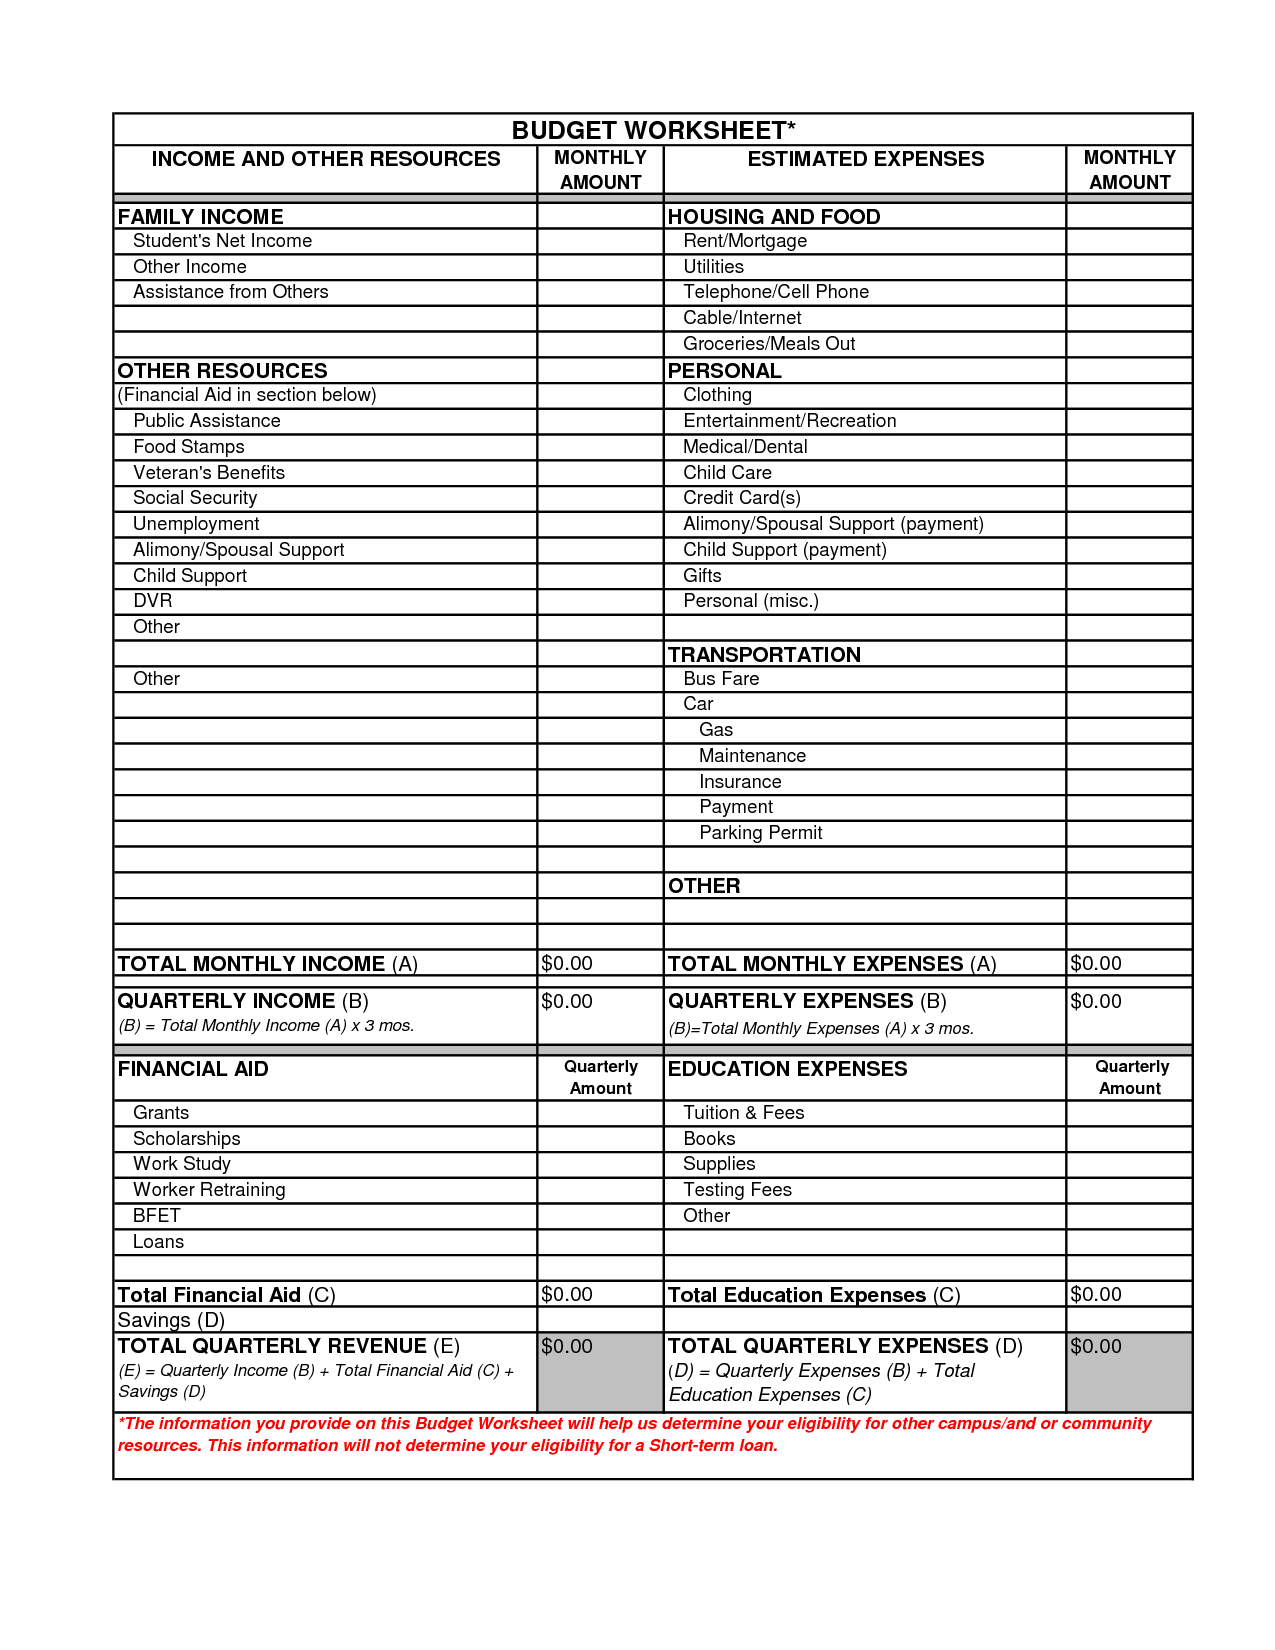 Monthly Income and Expense Worksheet Image